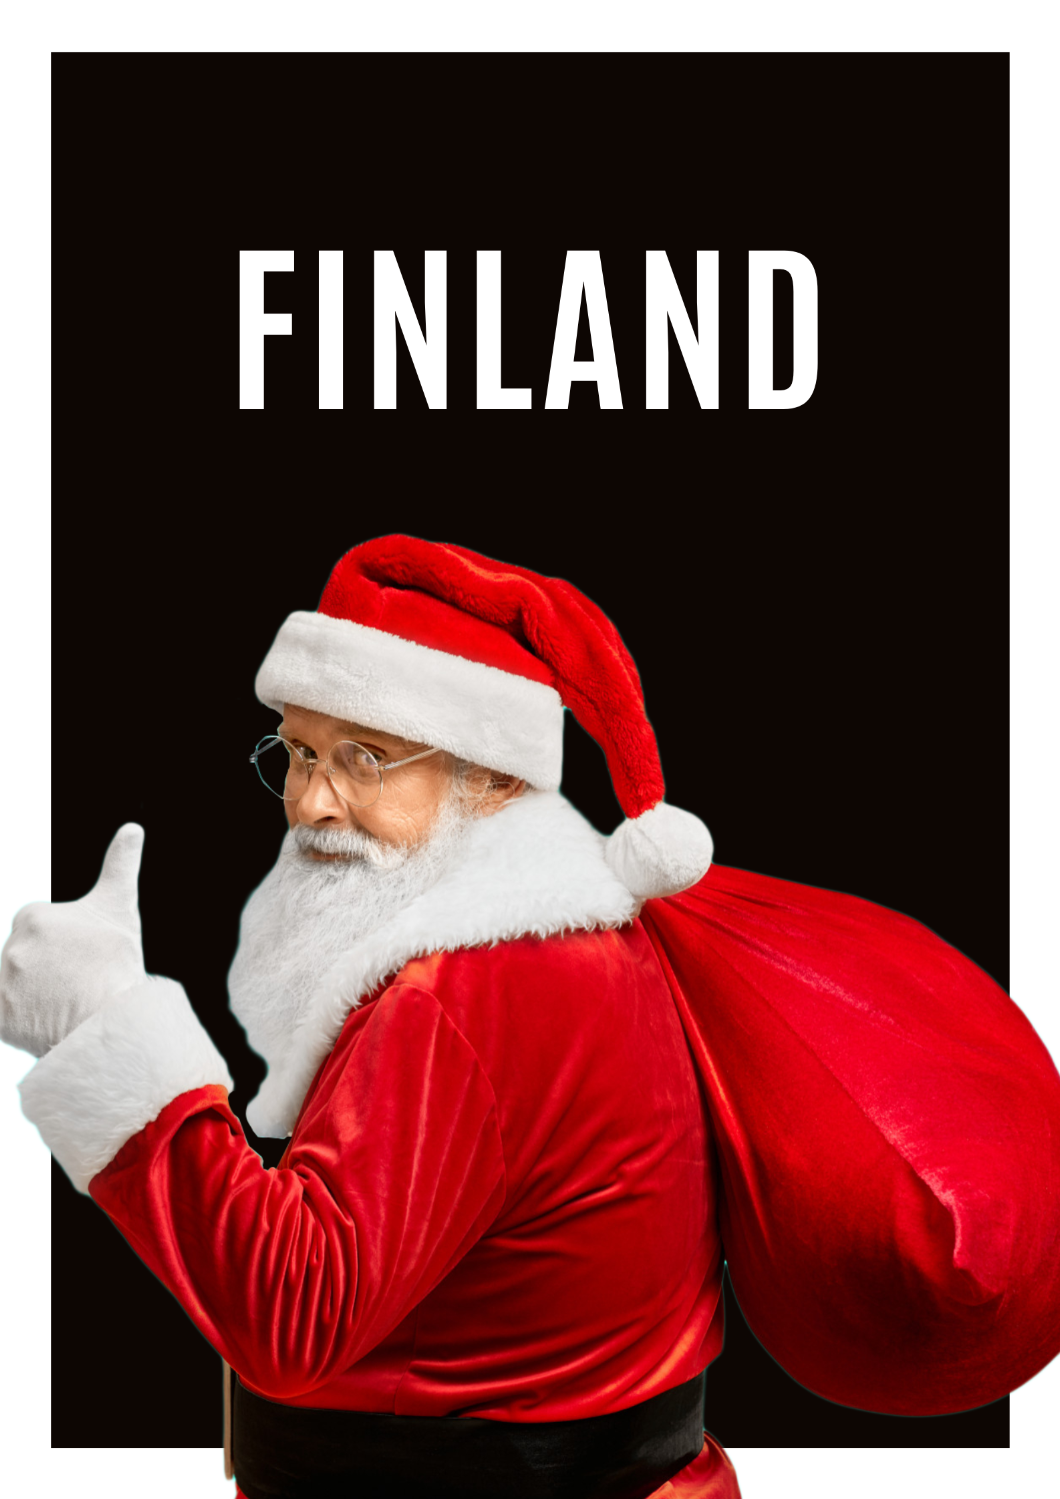 Come and spend a Christmas holiday in Finland